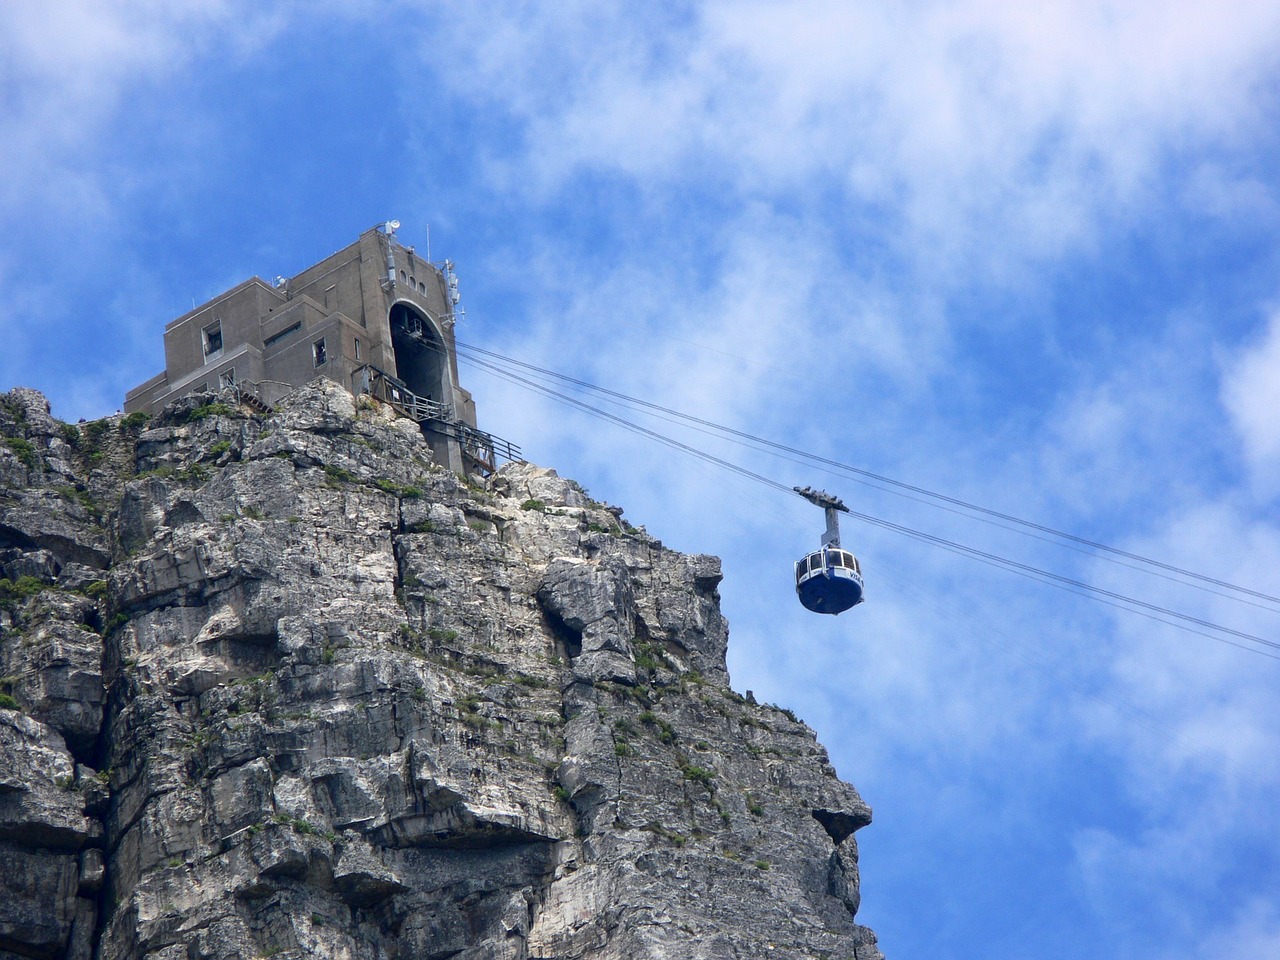 Aerial Cable way at Table Mountain